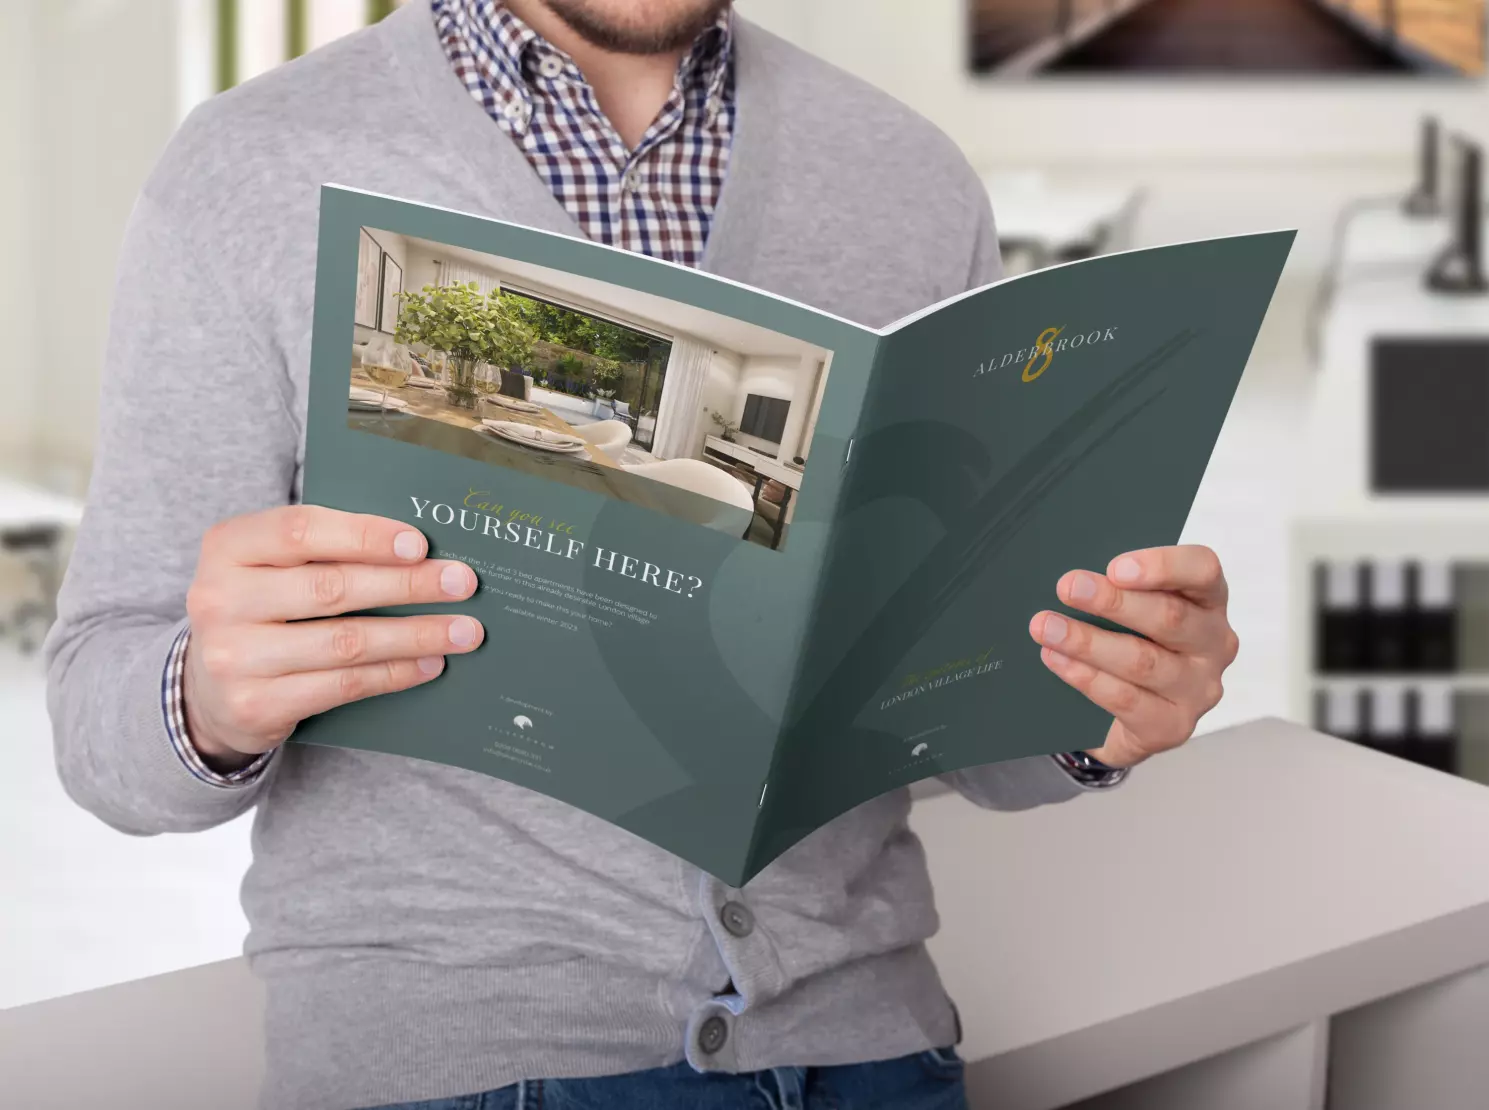 Picture of a man sitting on a desk holding the Alderbrook Road property brochure open and reading it